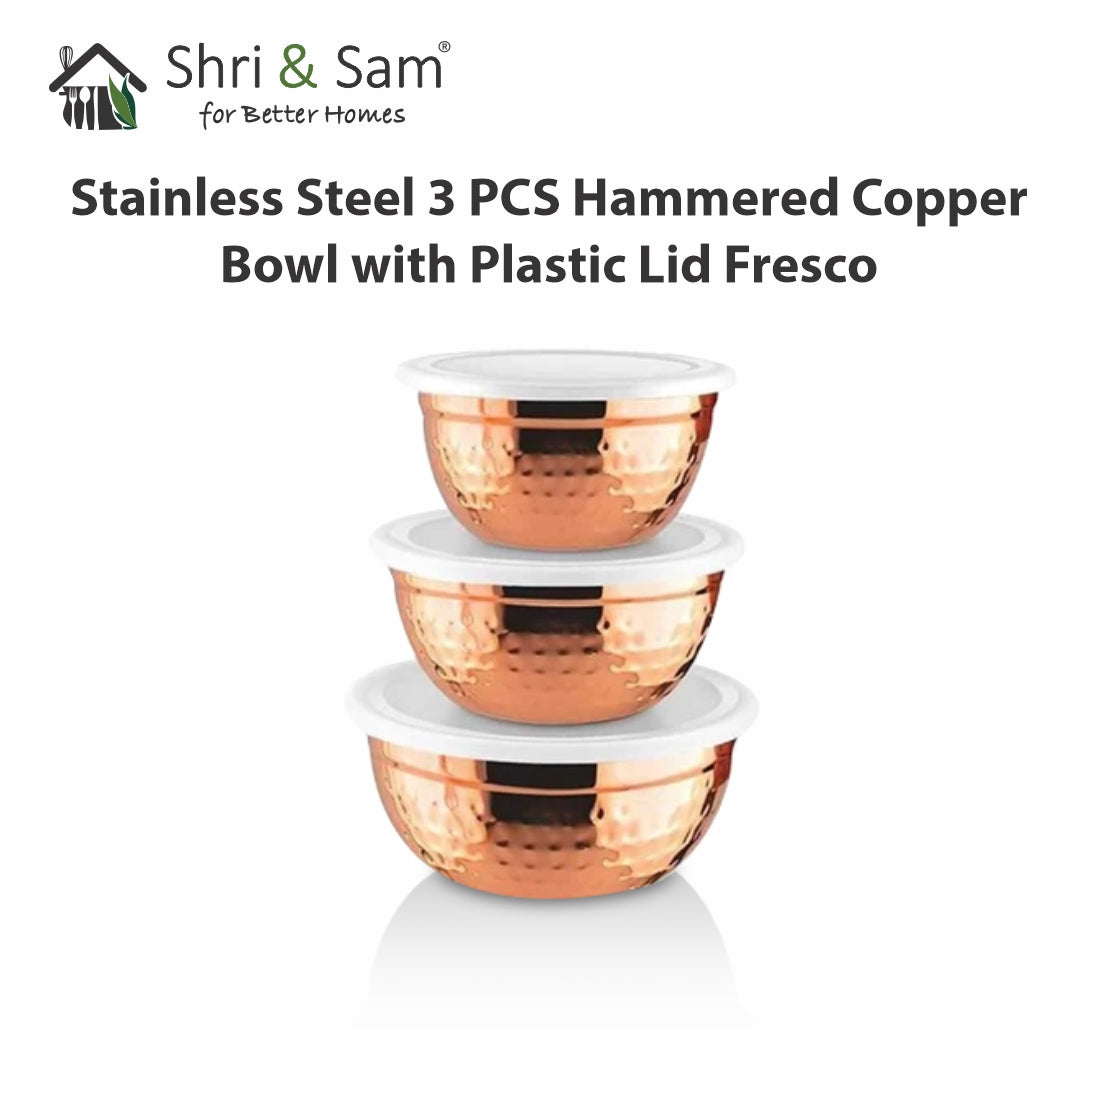 Stainless Steel 3 PCS Hammered Copper Bowl with Plastic Lid Fresco